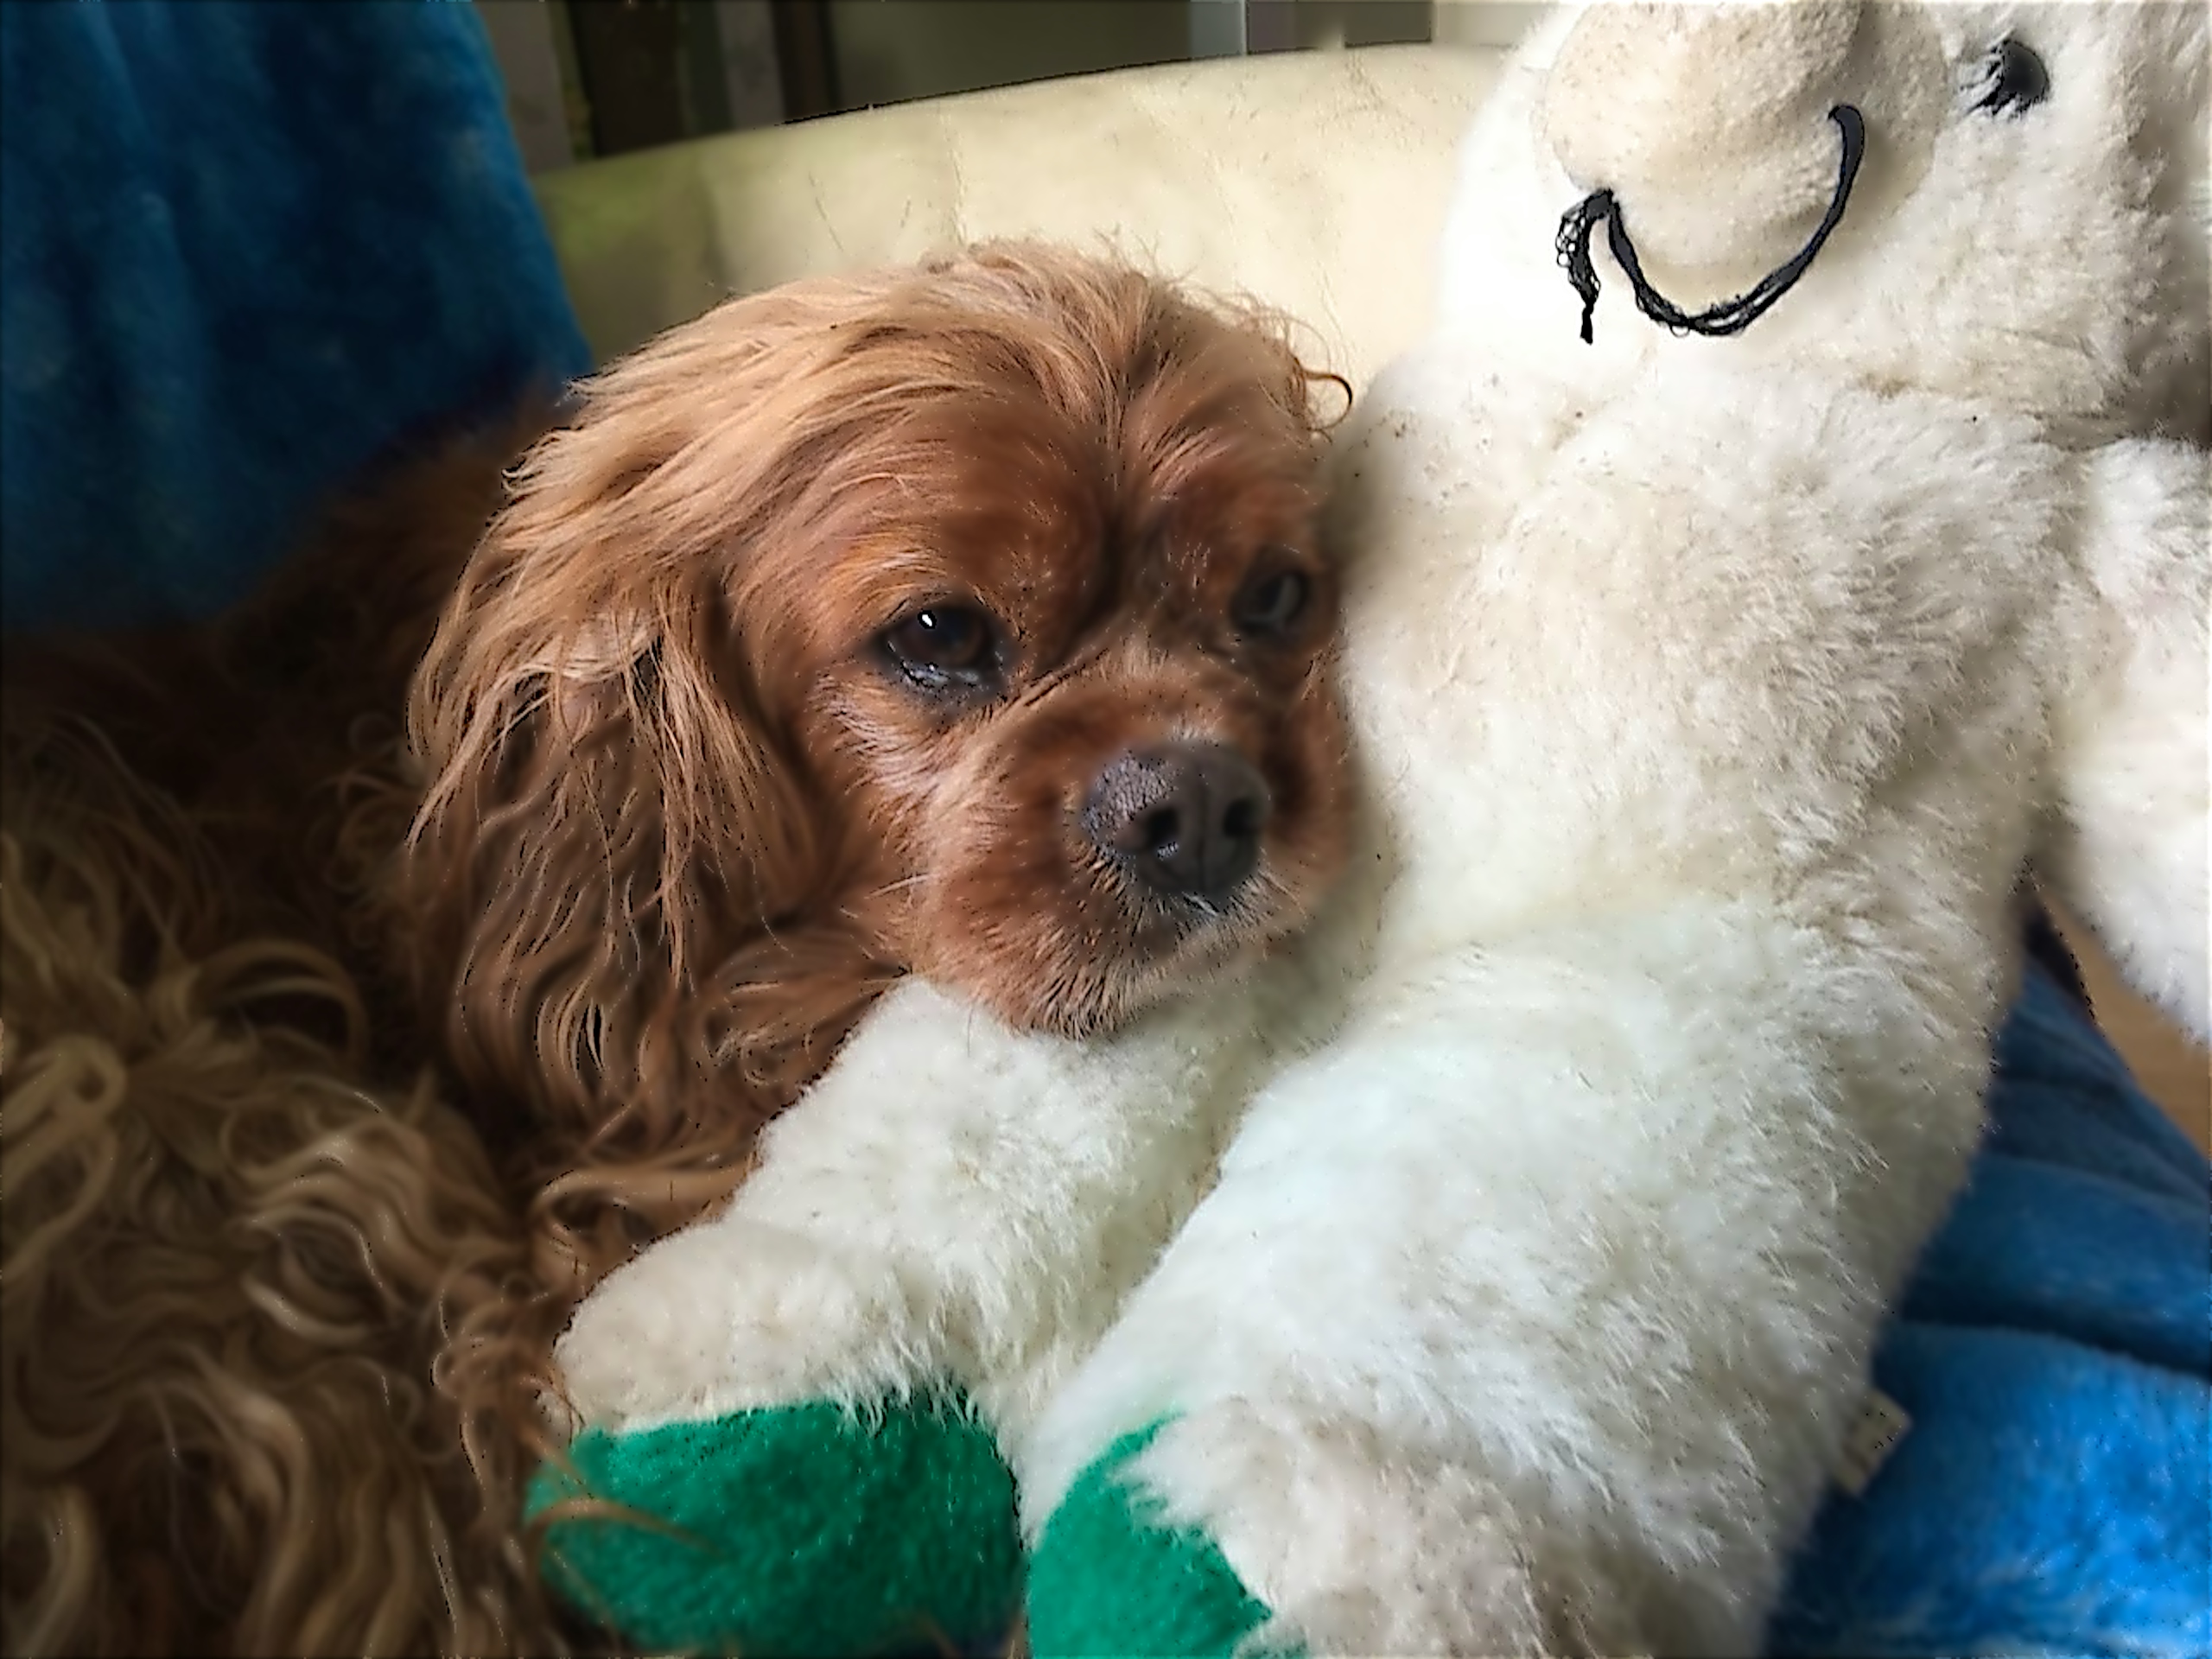 Profile image of Jenni's spaniel, Rumour, with a stuffed toy.